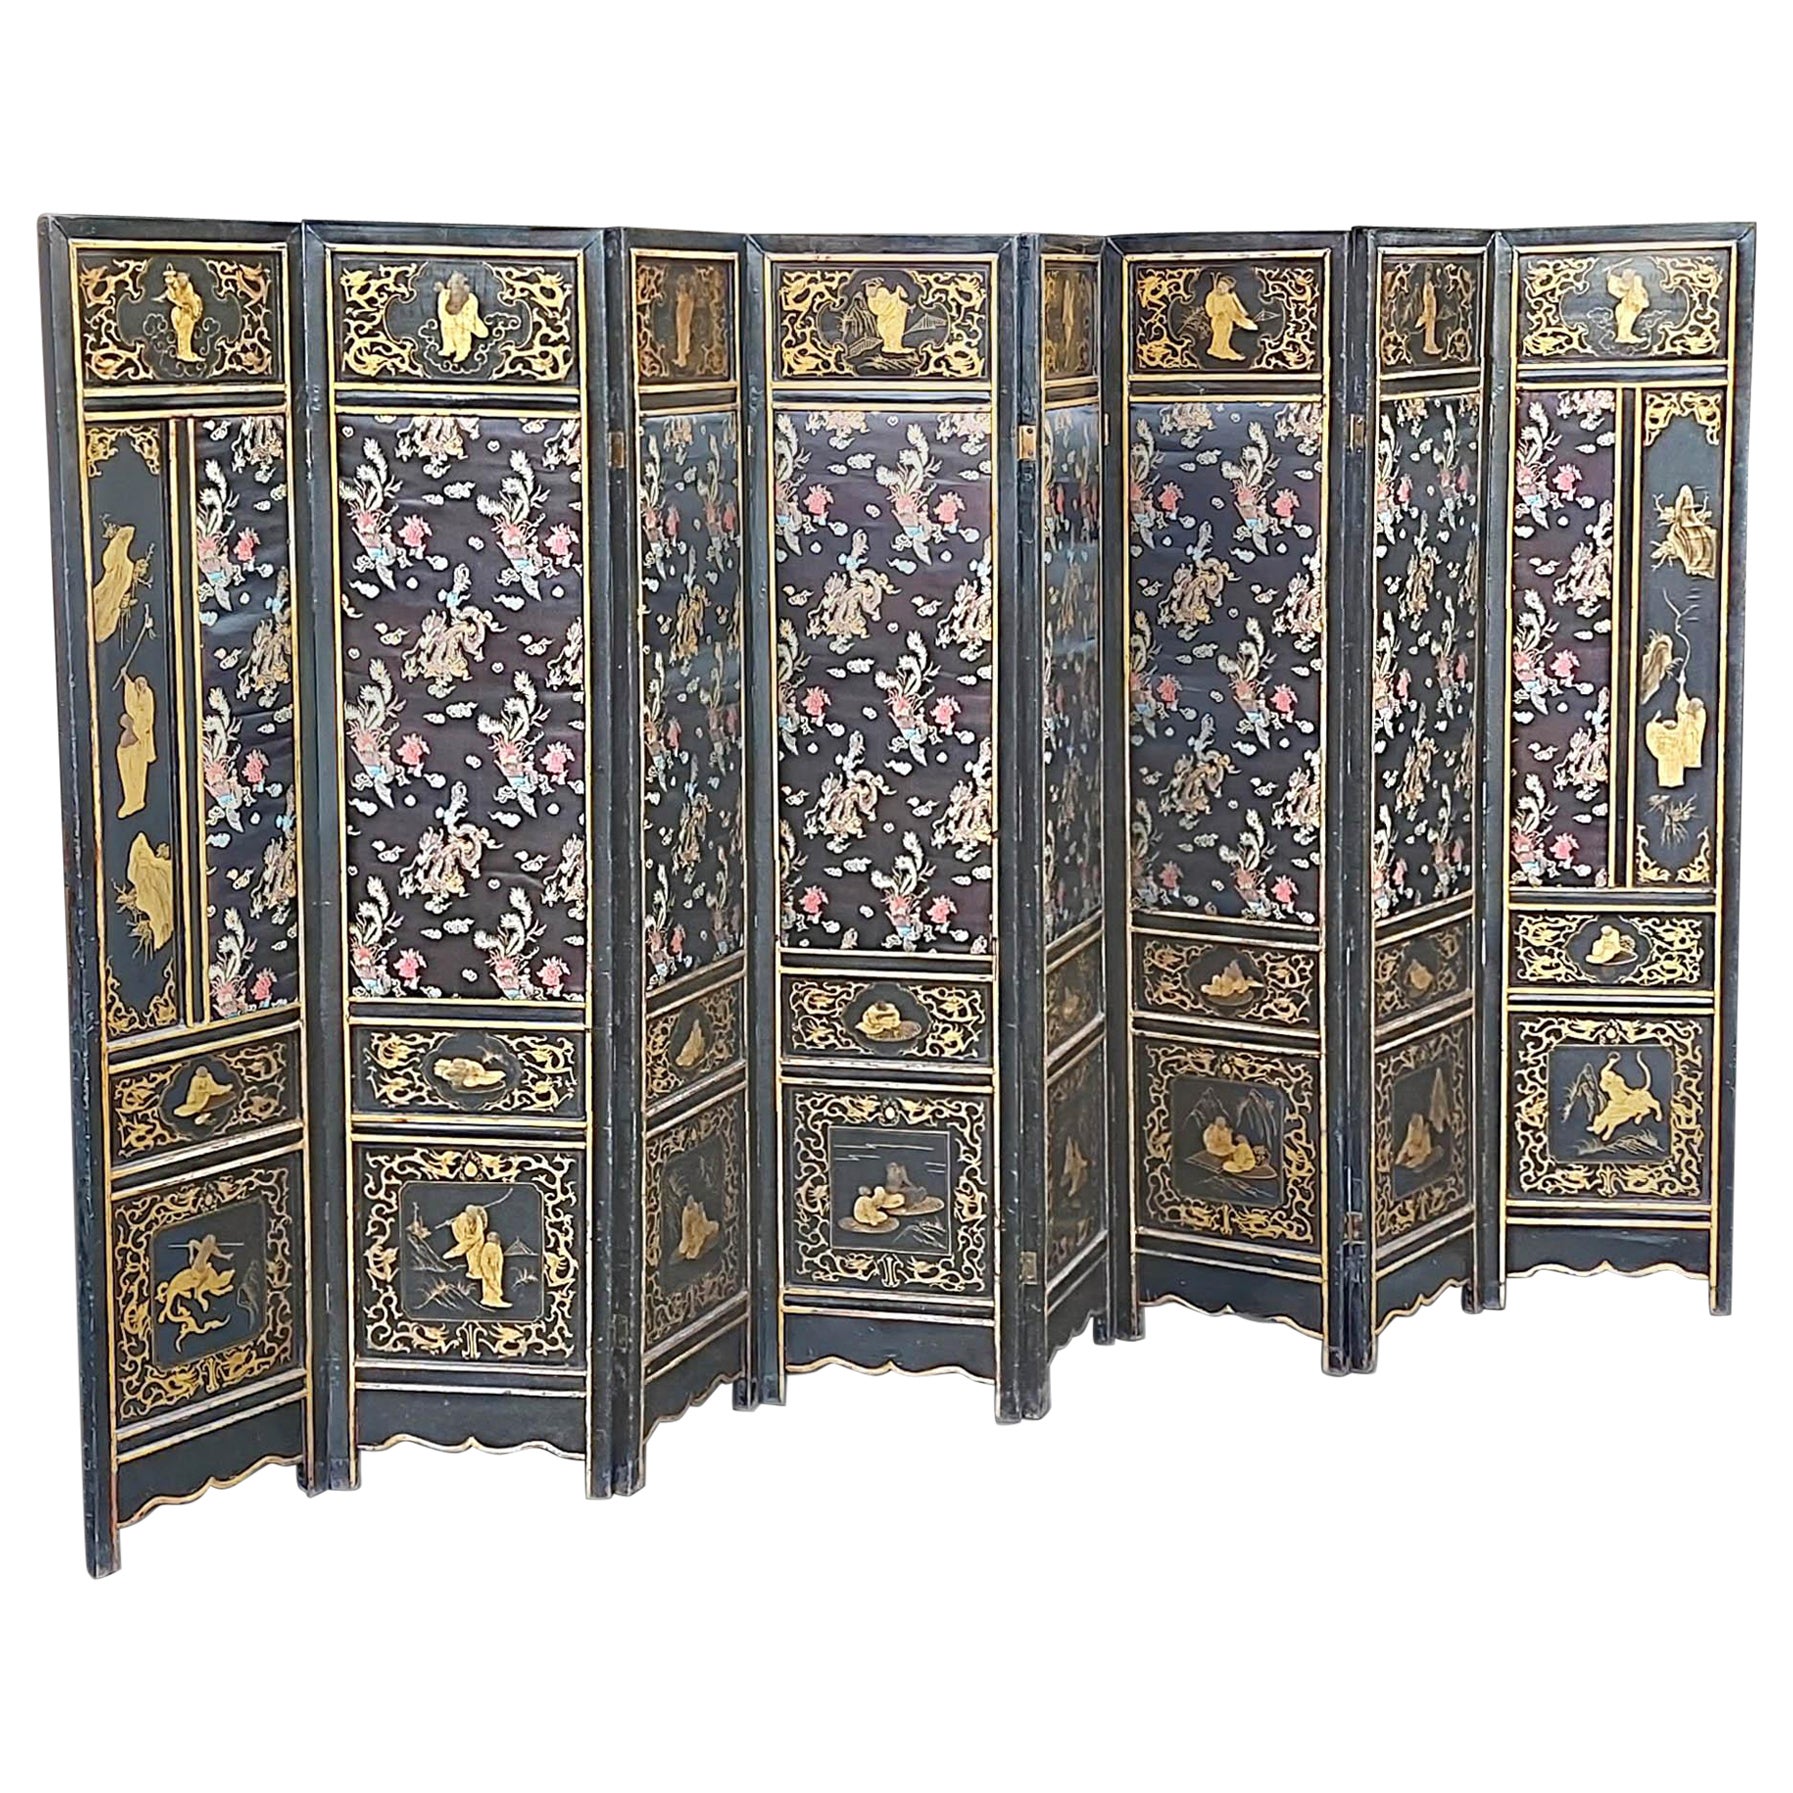 Regency Chinese Imported Lacquered 8 Fold Dressing Screen For Sale